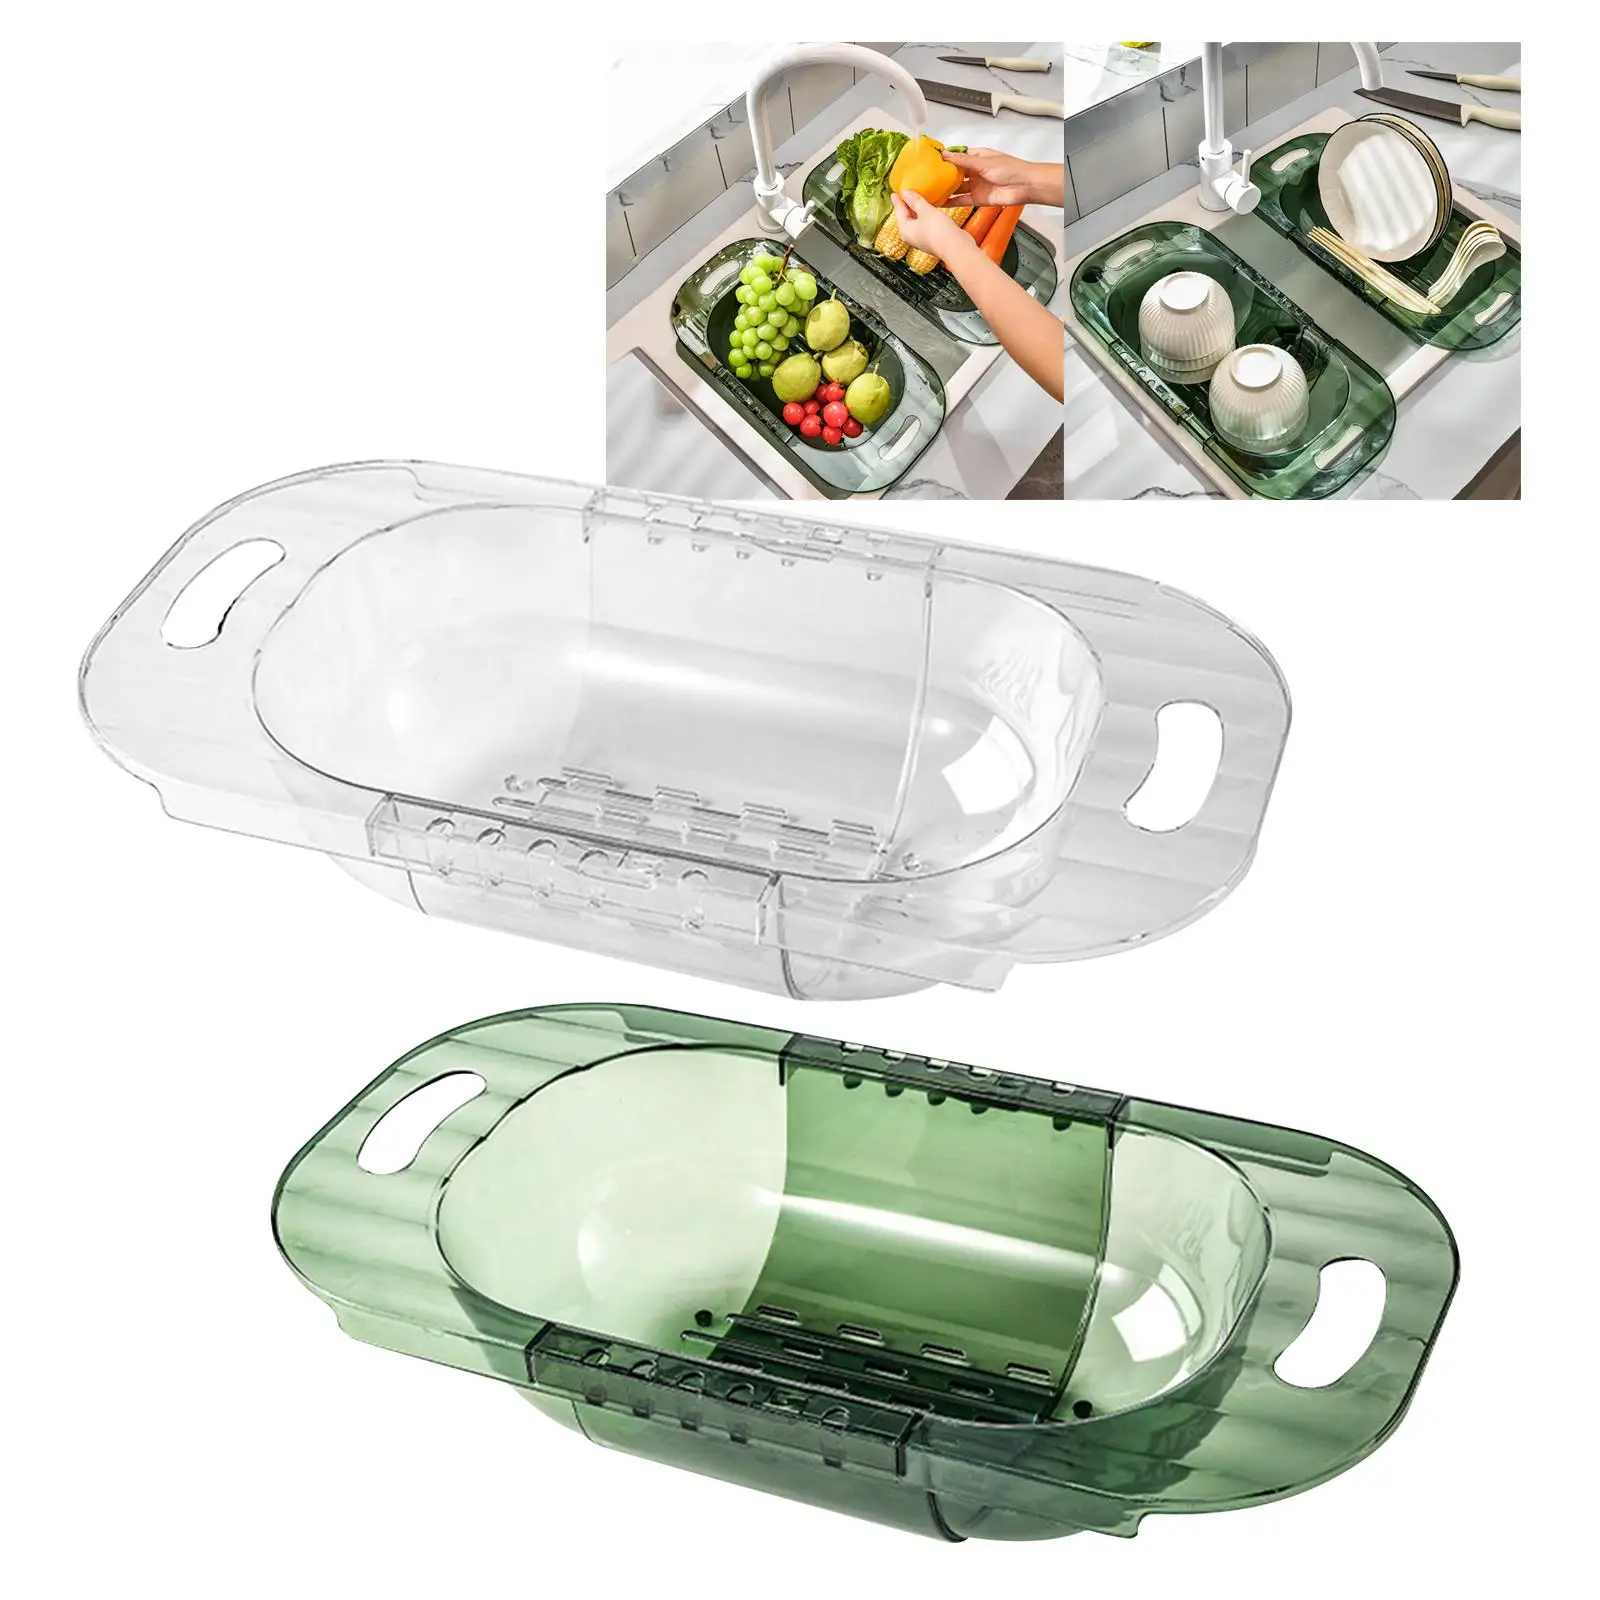 Retractable Strainer Container Wash Basins Drain Baskets Over The Sink Strainer Colander for Dishes Fruits Pasta Pantry